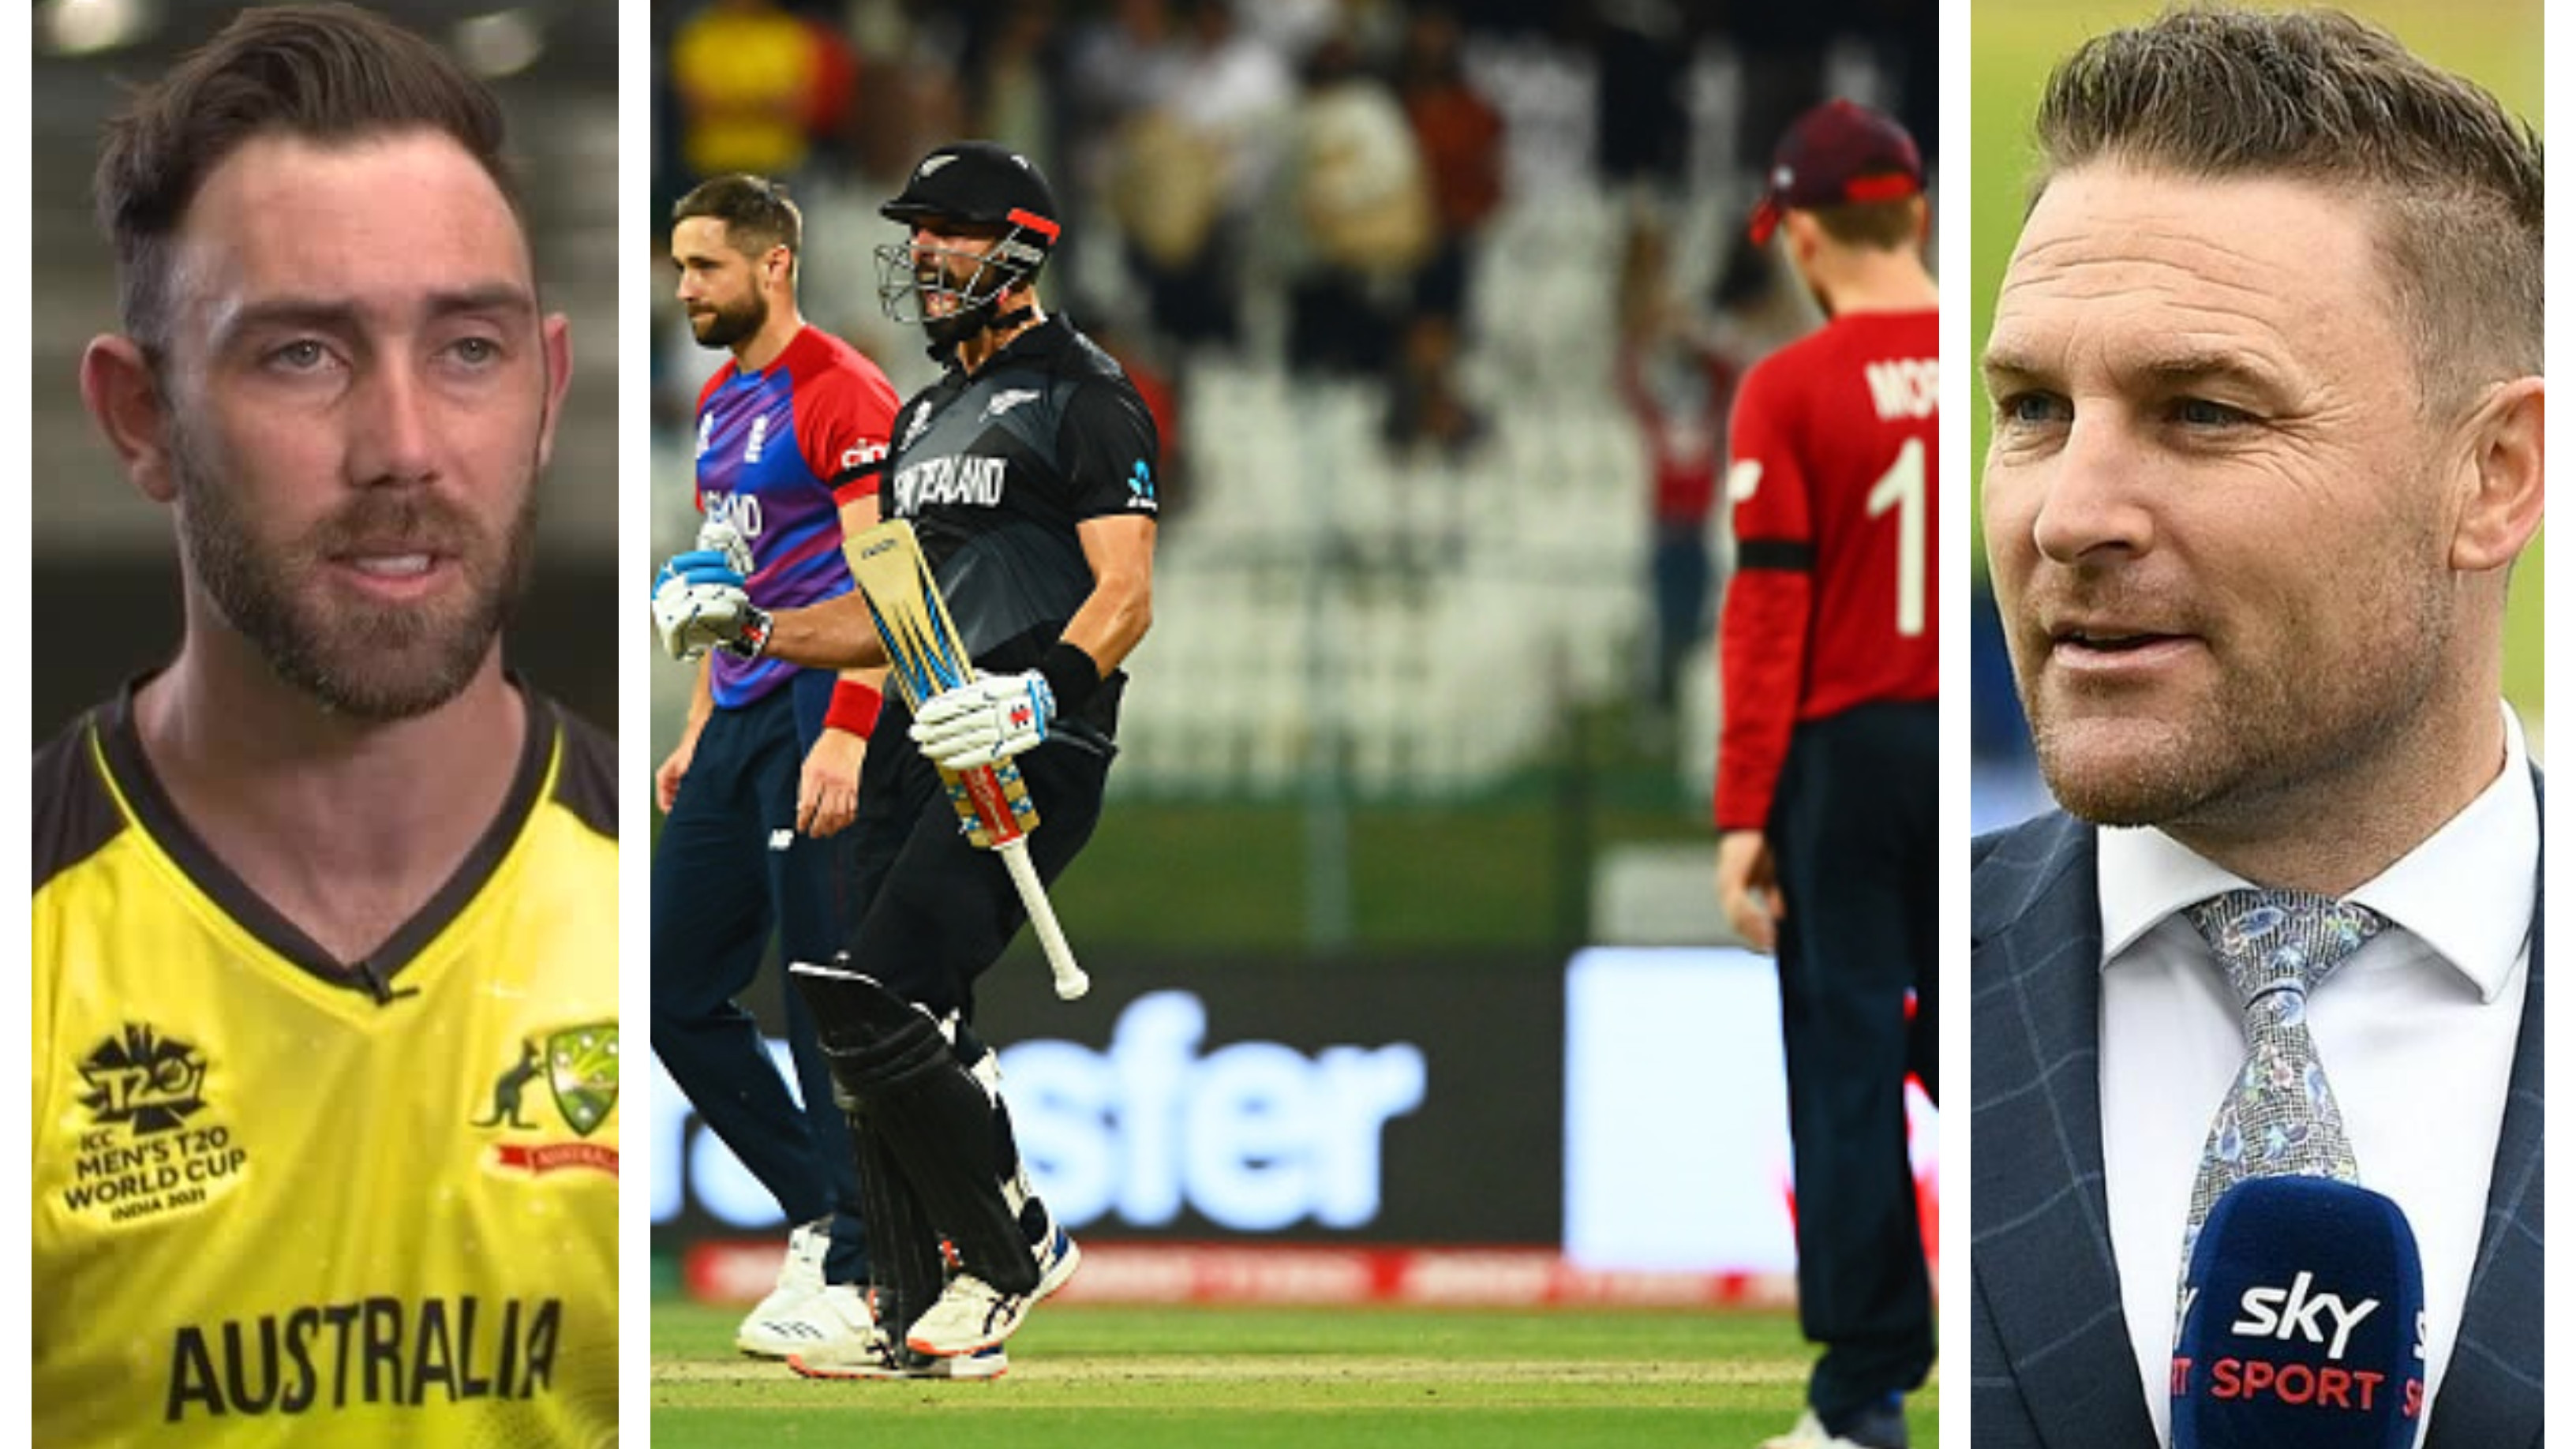 T20 World Cup 2021: Cricket fraternity in awe as Daryl Mitchell’s scintillating 72* powers New Zealand to final